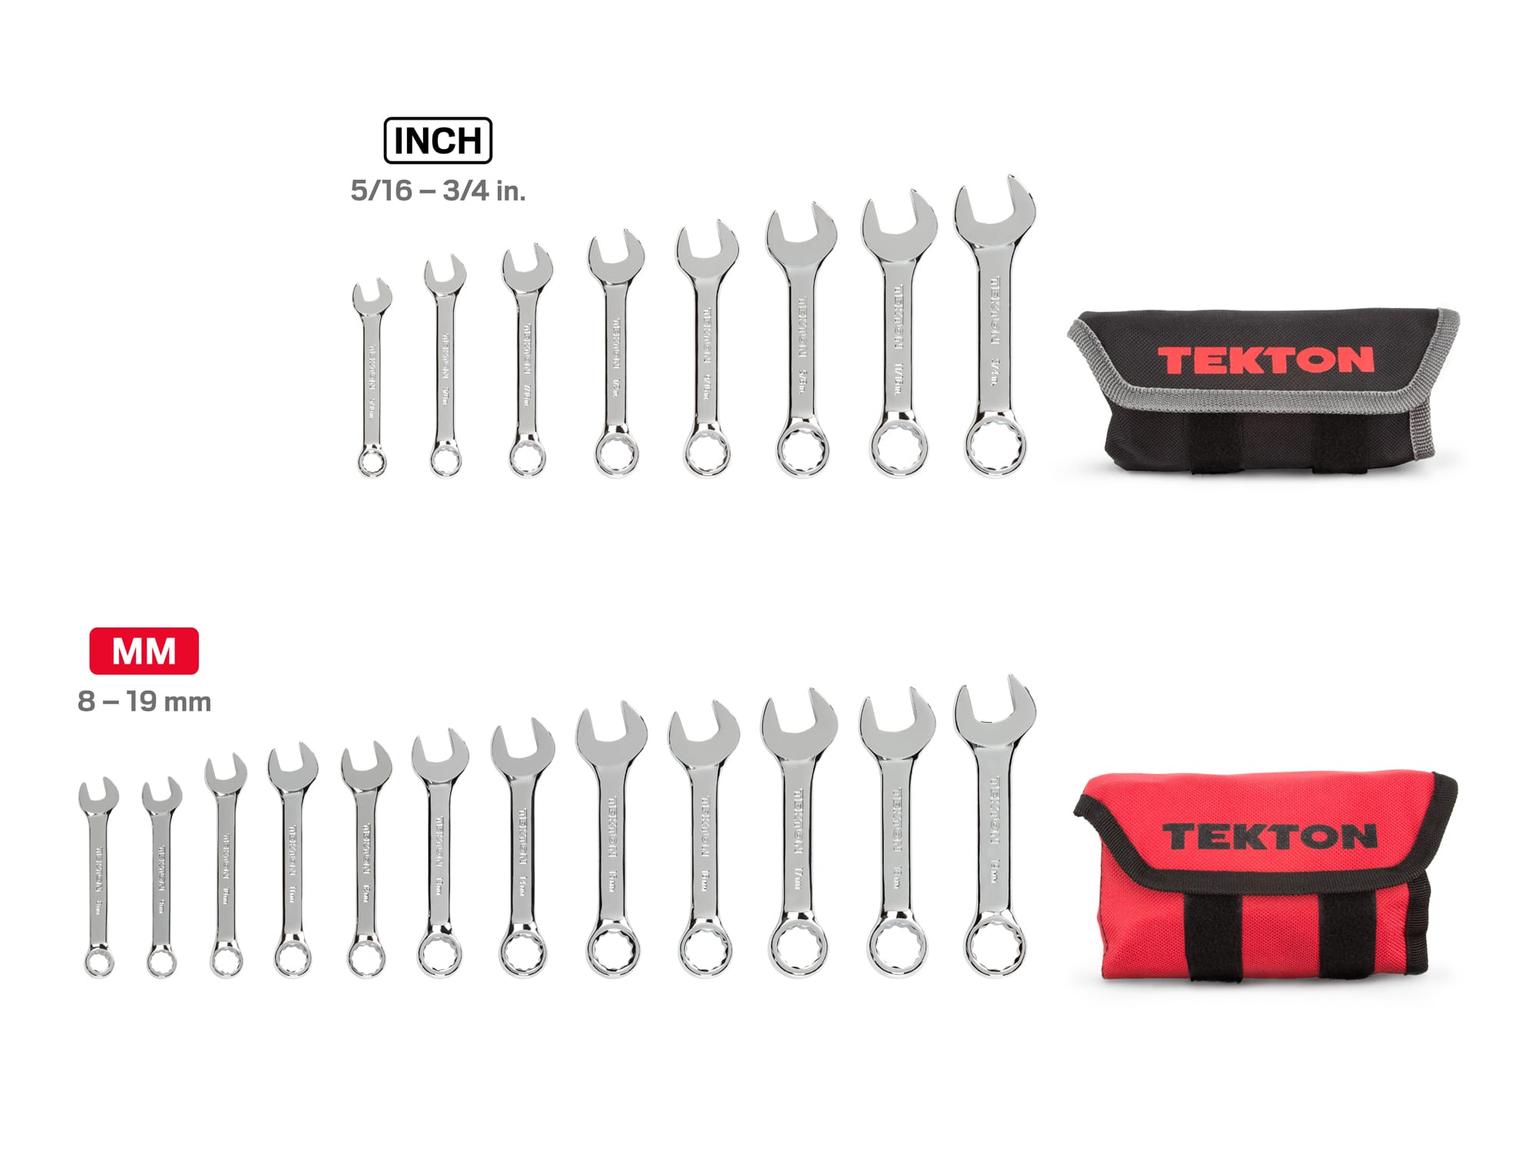 TEKTON WCB94601-T Stubby Combination Wrench Set with Pouch, 20-Piece (5/16 - 3/4 in., 8 - 19 mm)